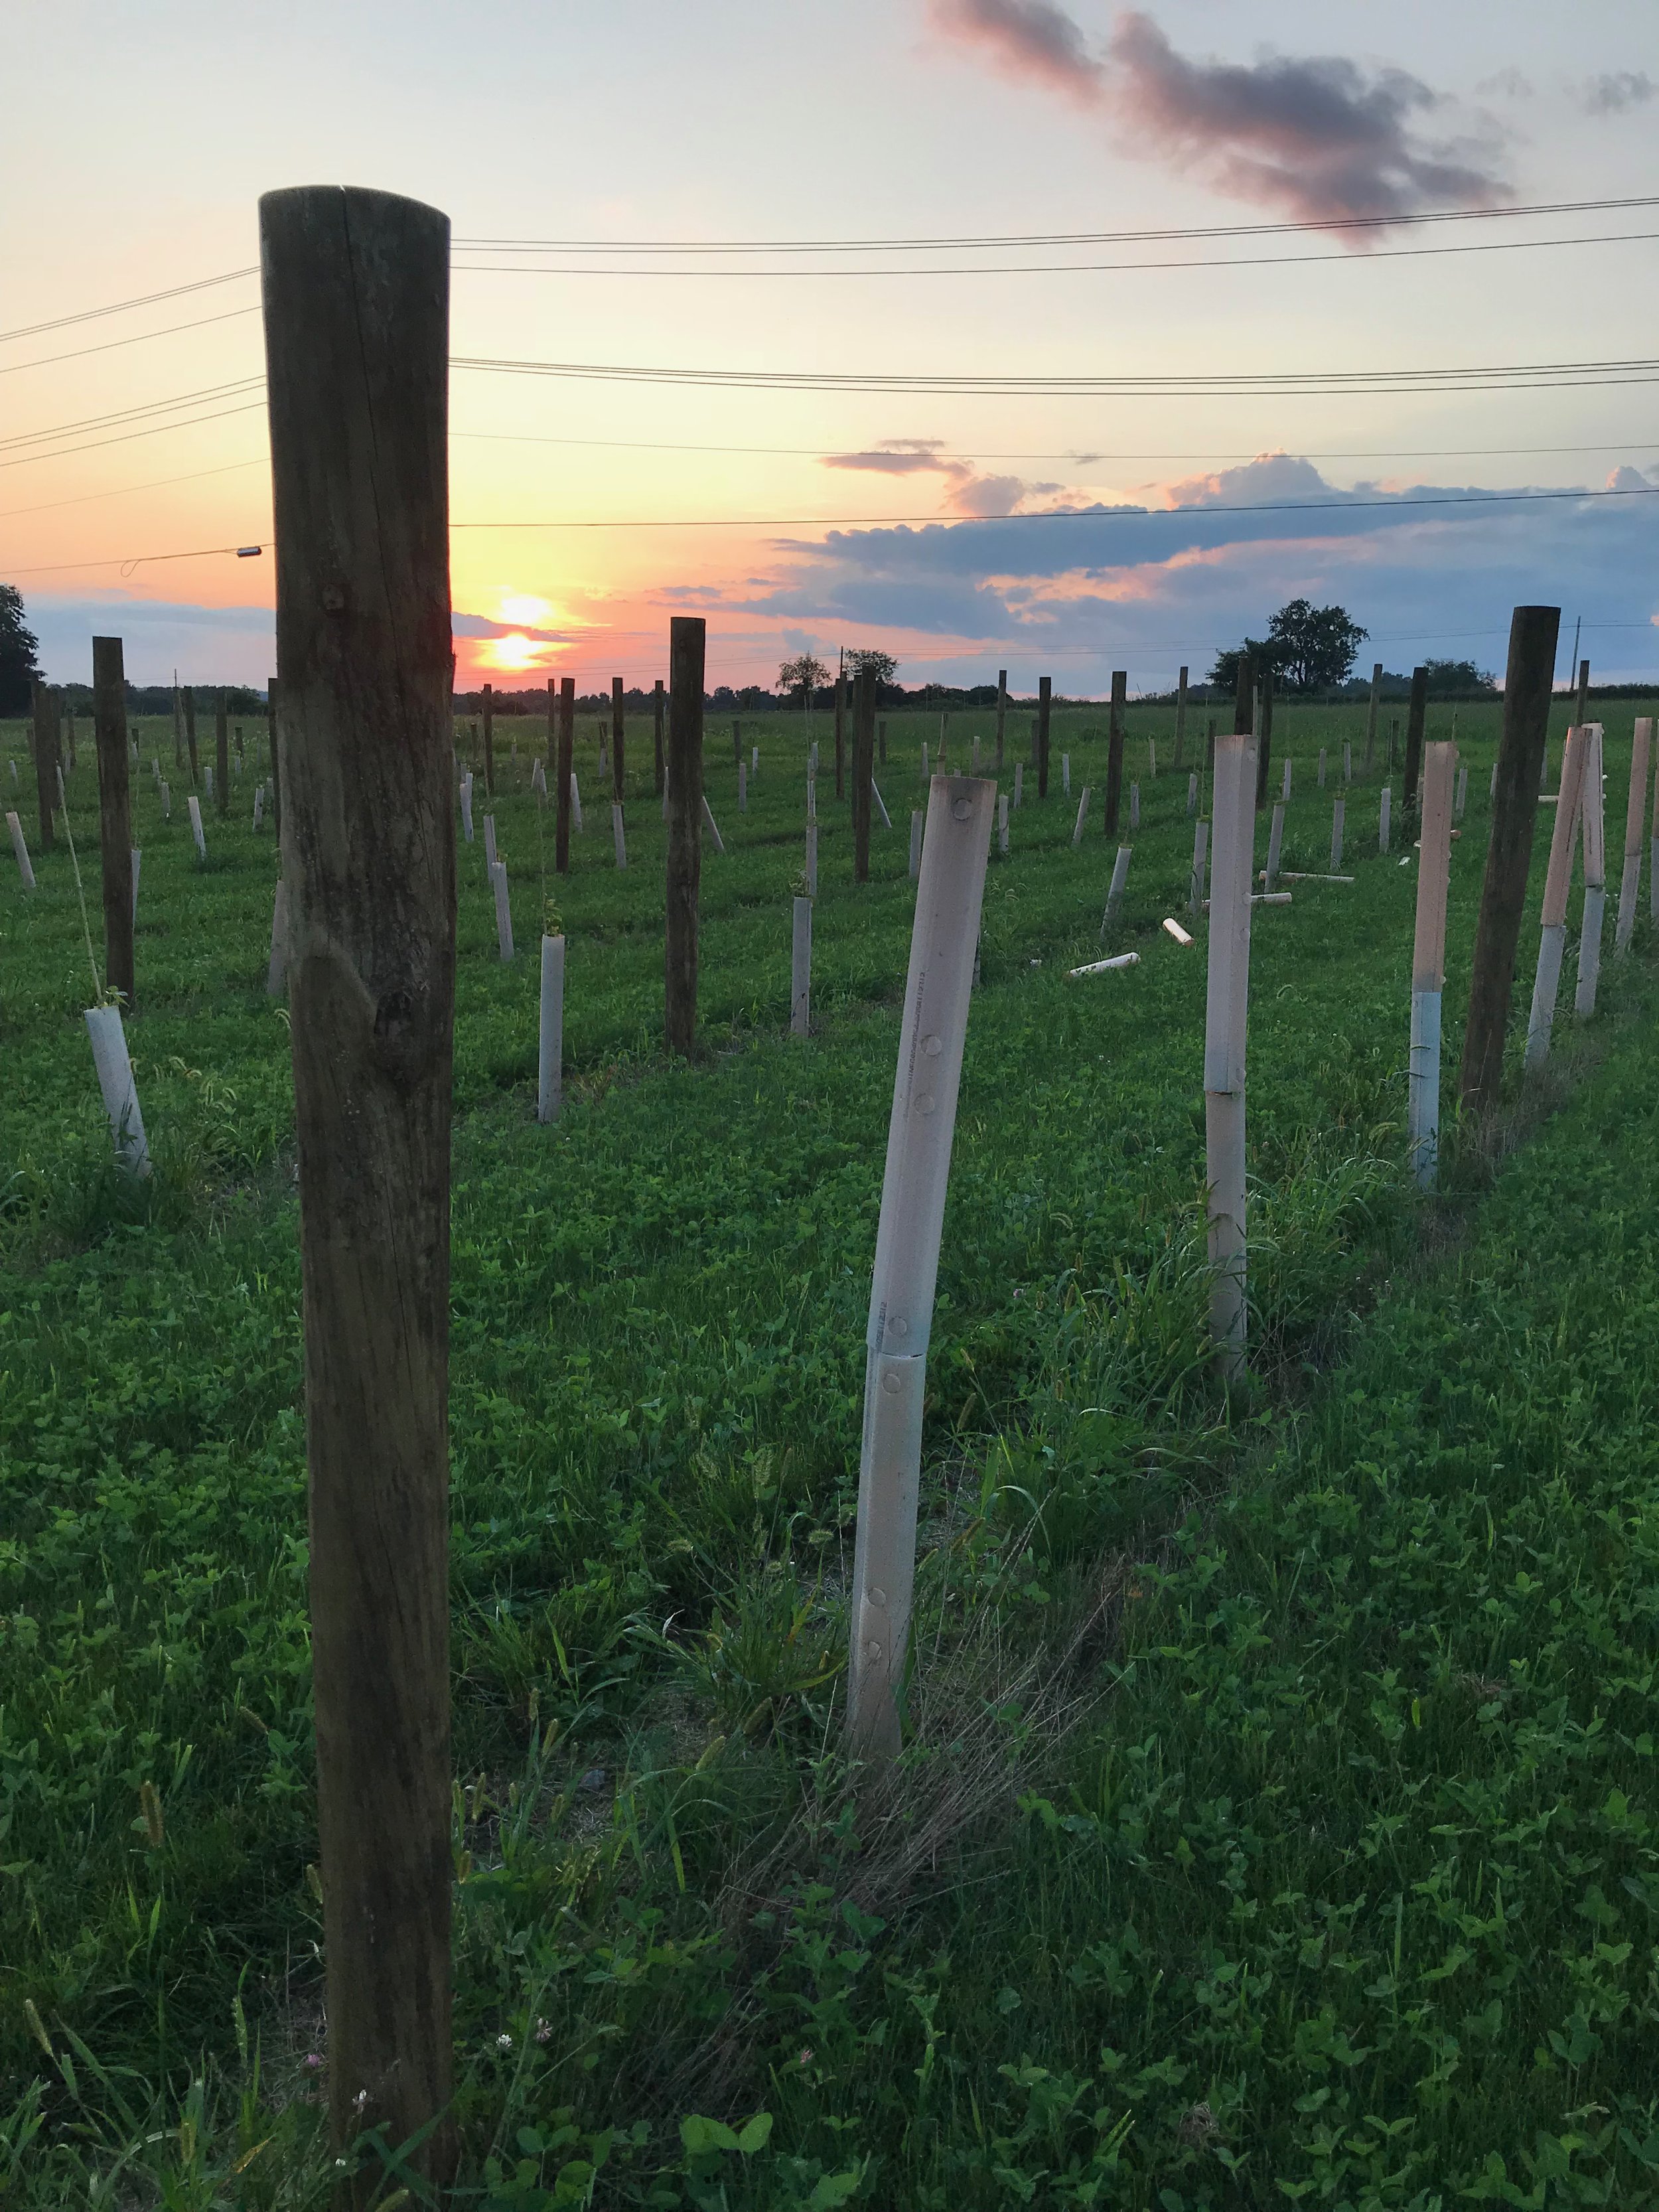   Sunset in the vineyard.  